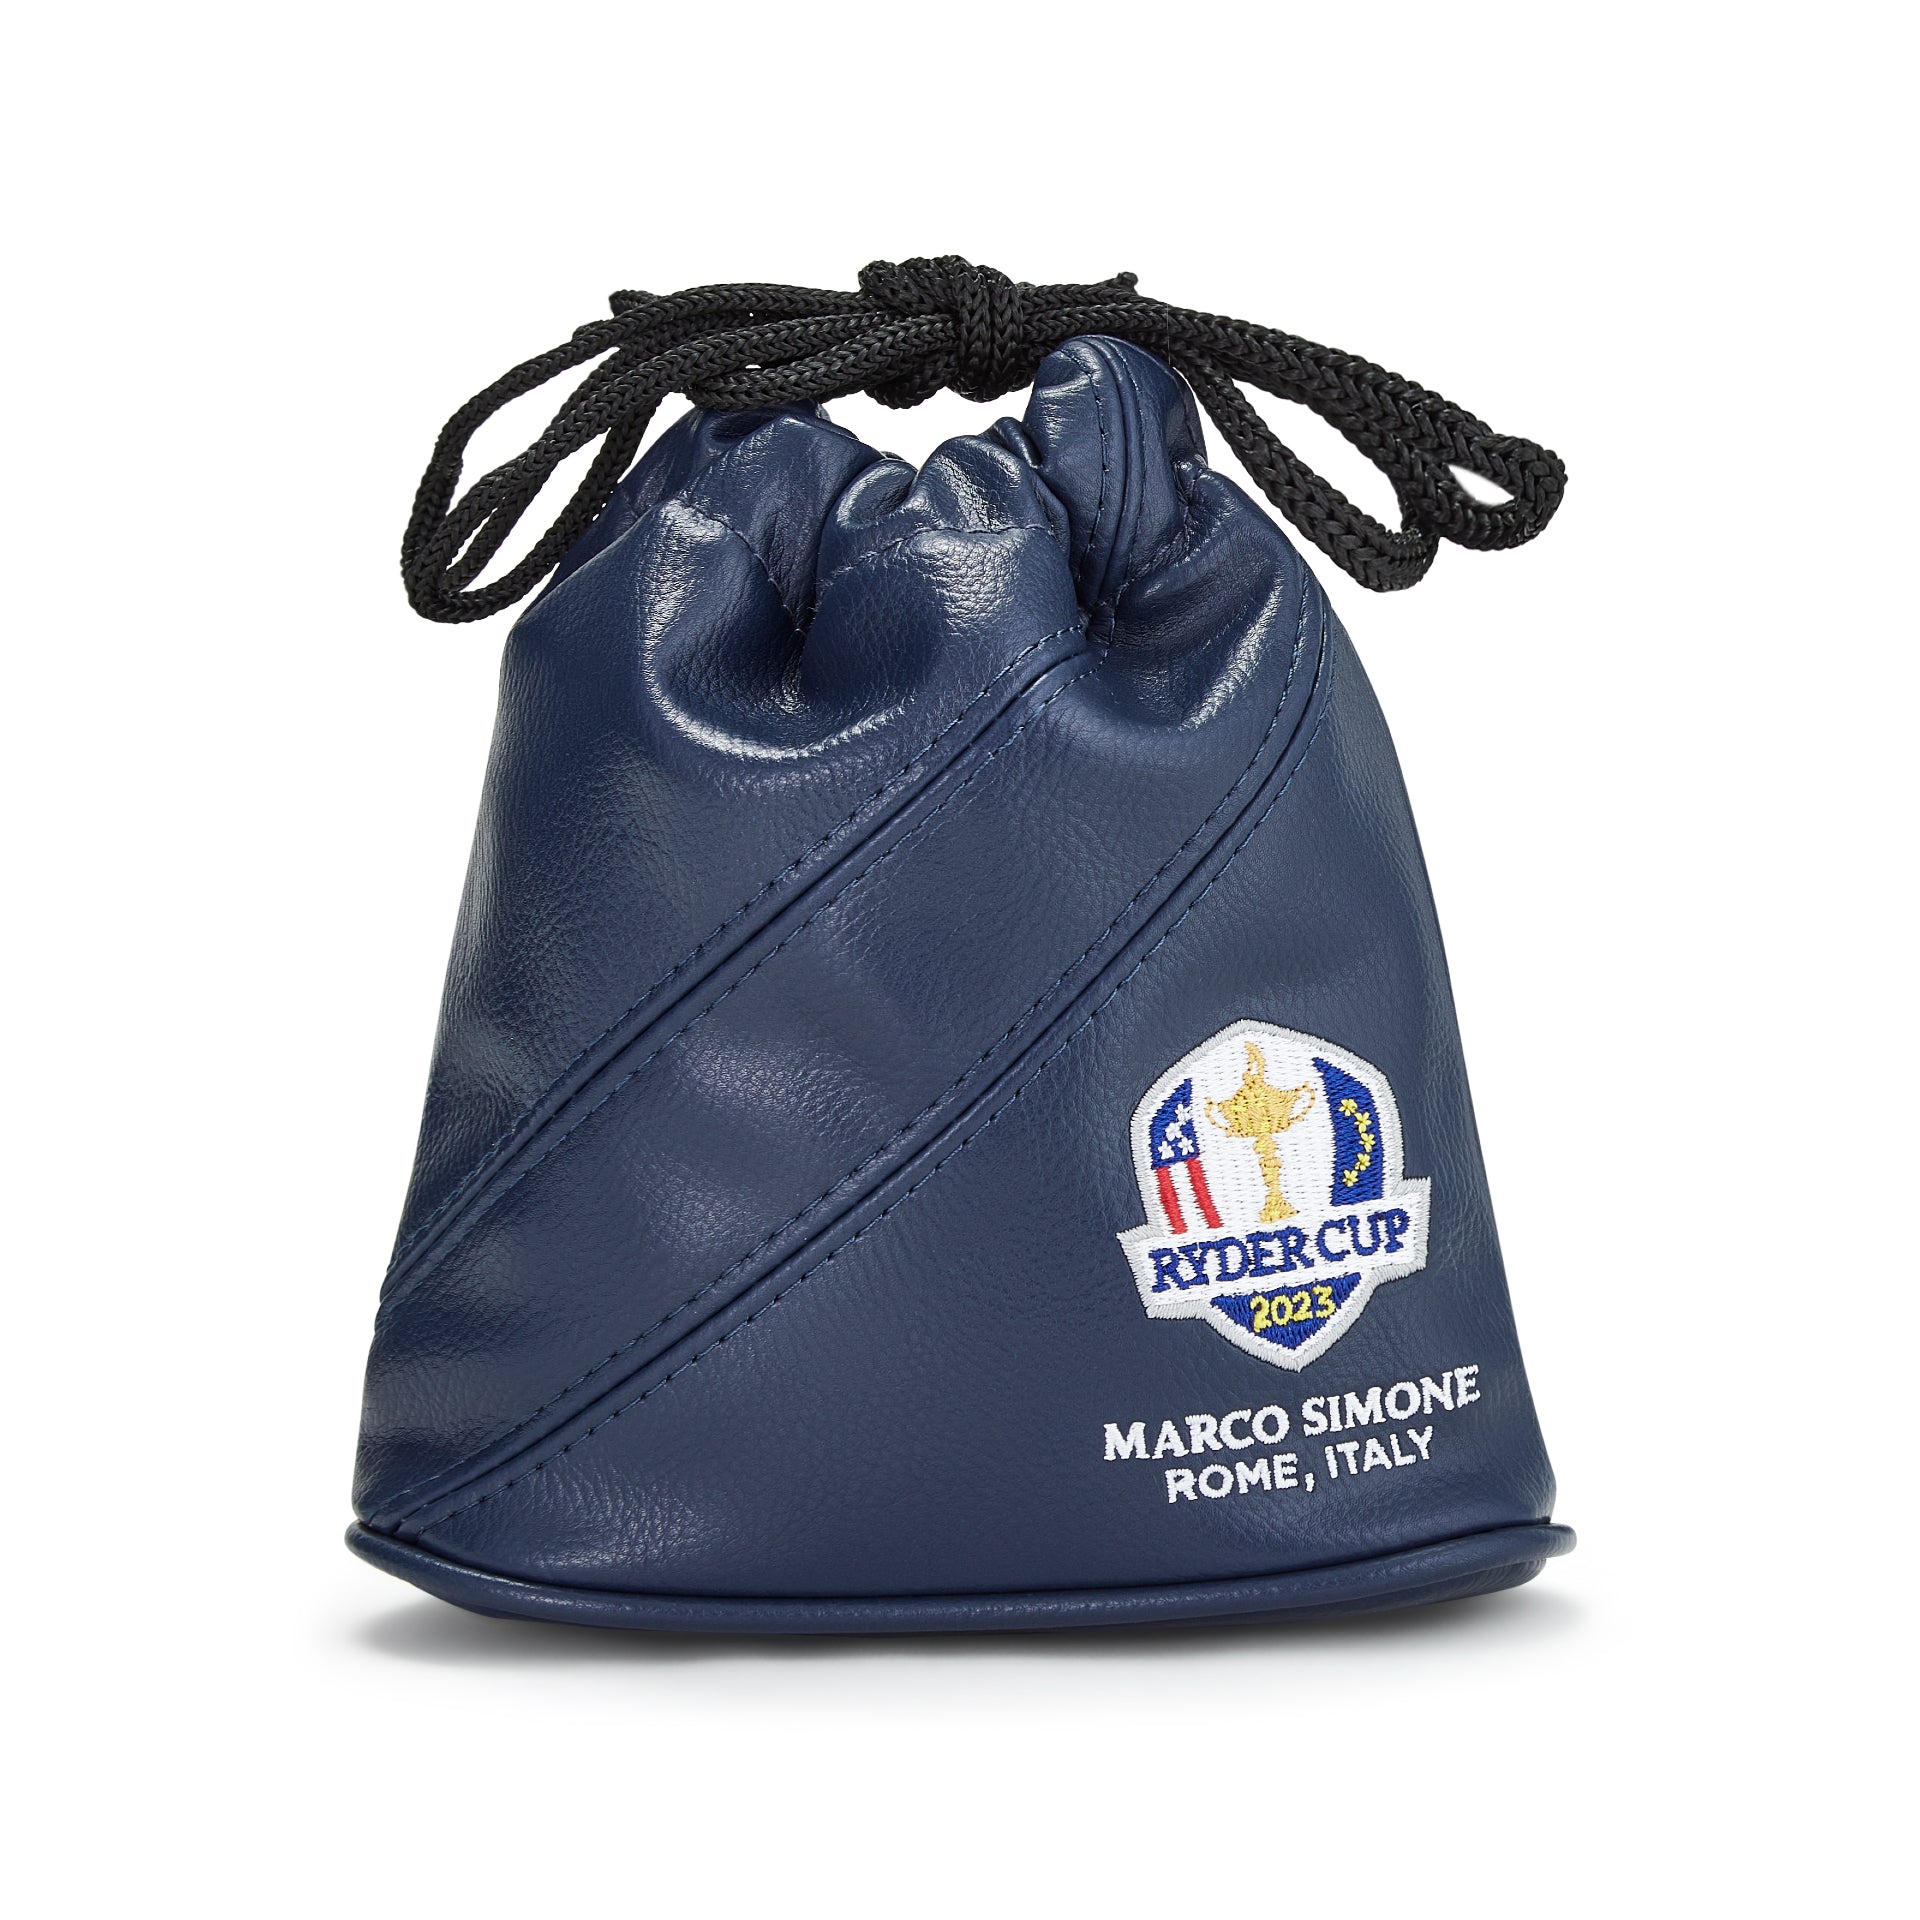 Ryder Cup 2023: A look at the luxe European Ryder Cup uniforms by Italian  design house Loro Piana, Golf Equipment: Clubs, Balls, Bags